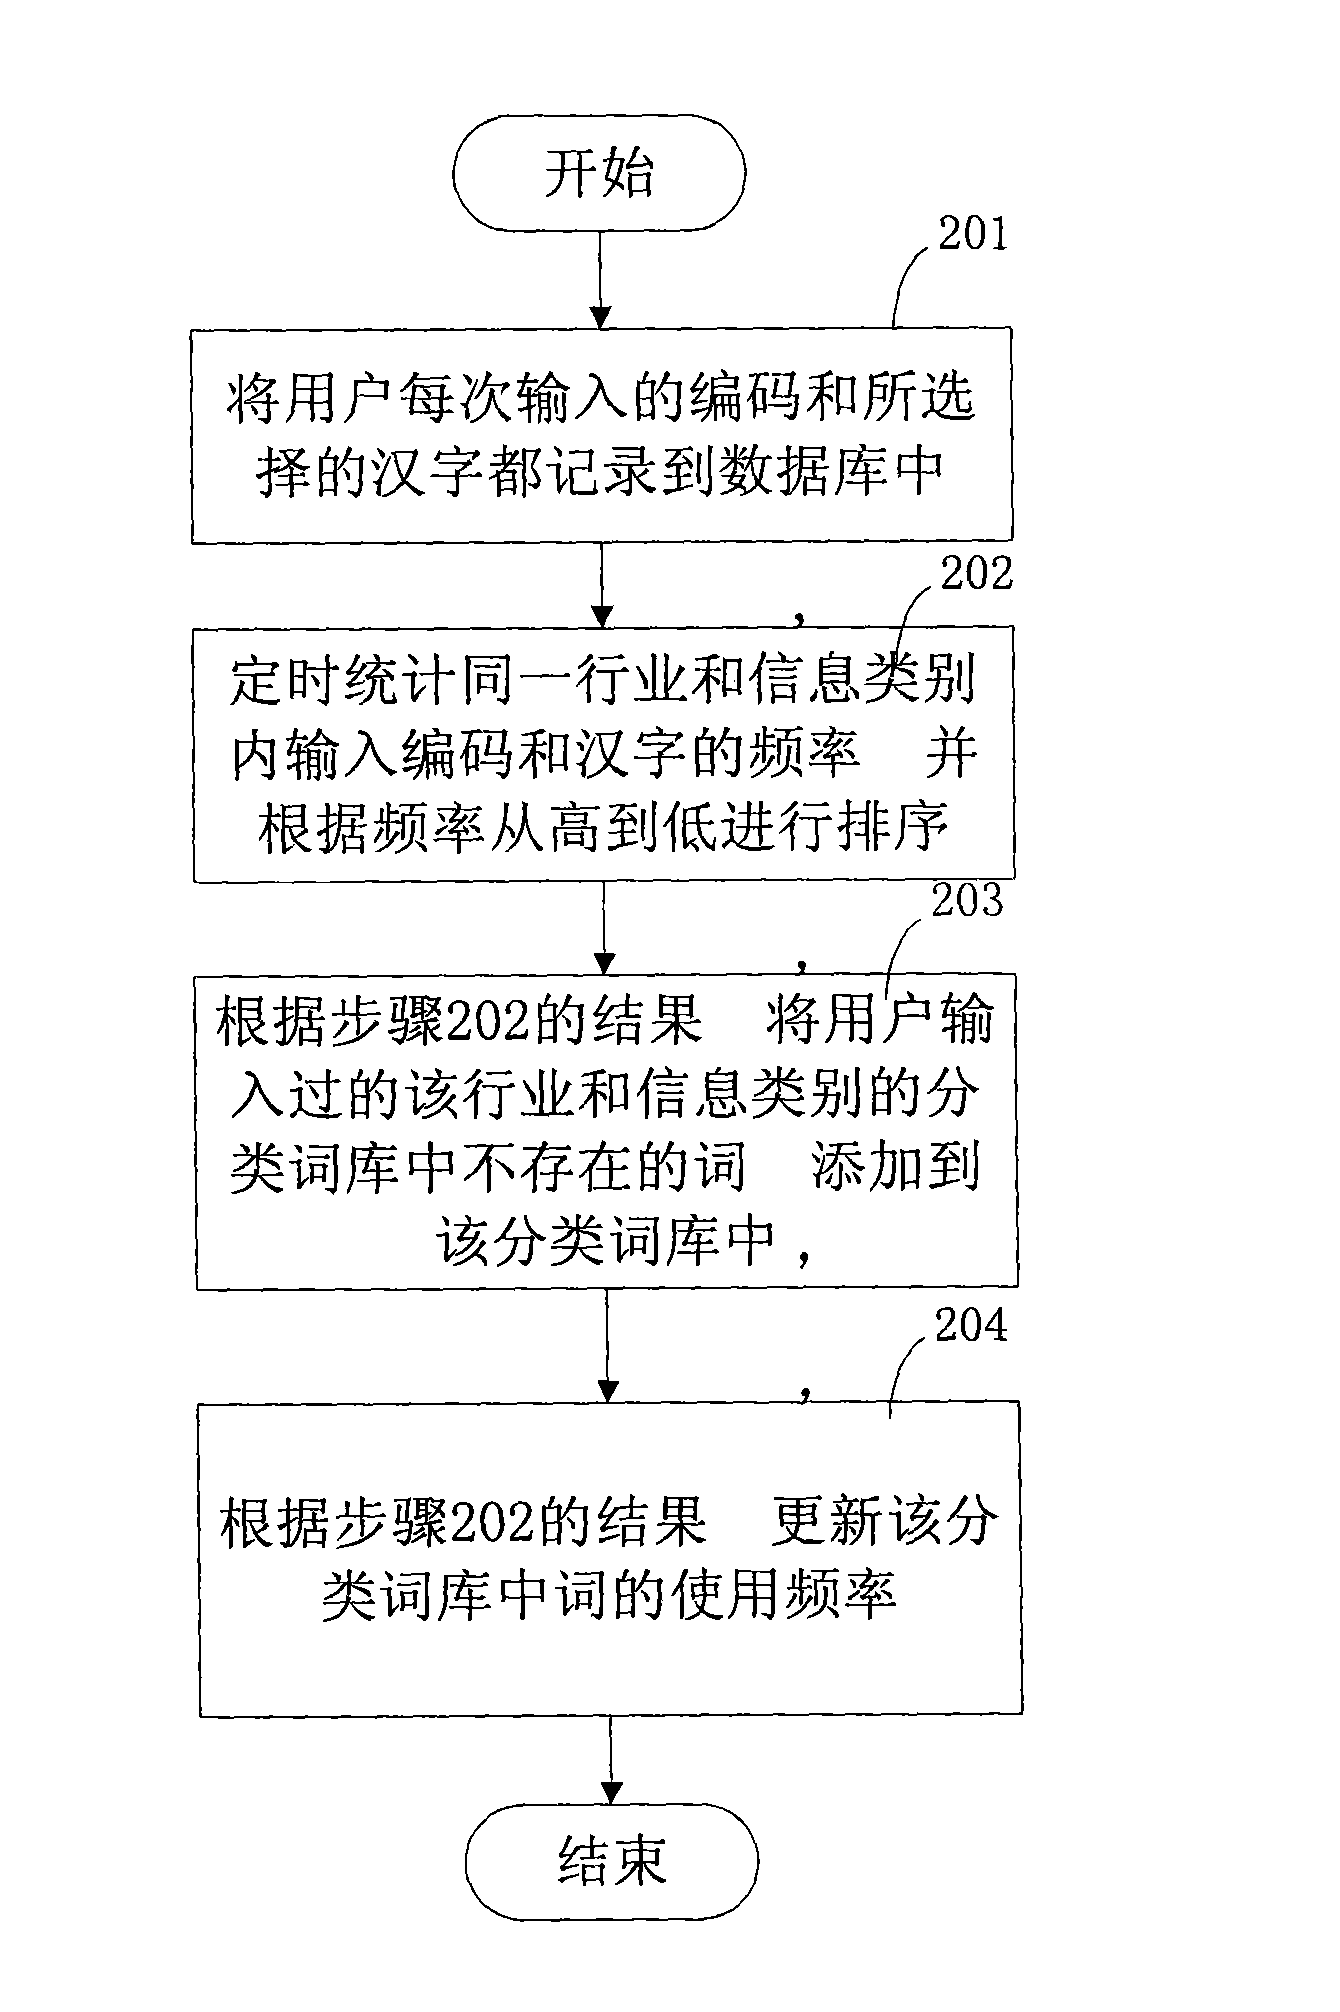 Method and system for intelligently inputting Chinese characters